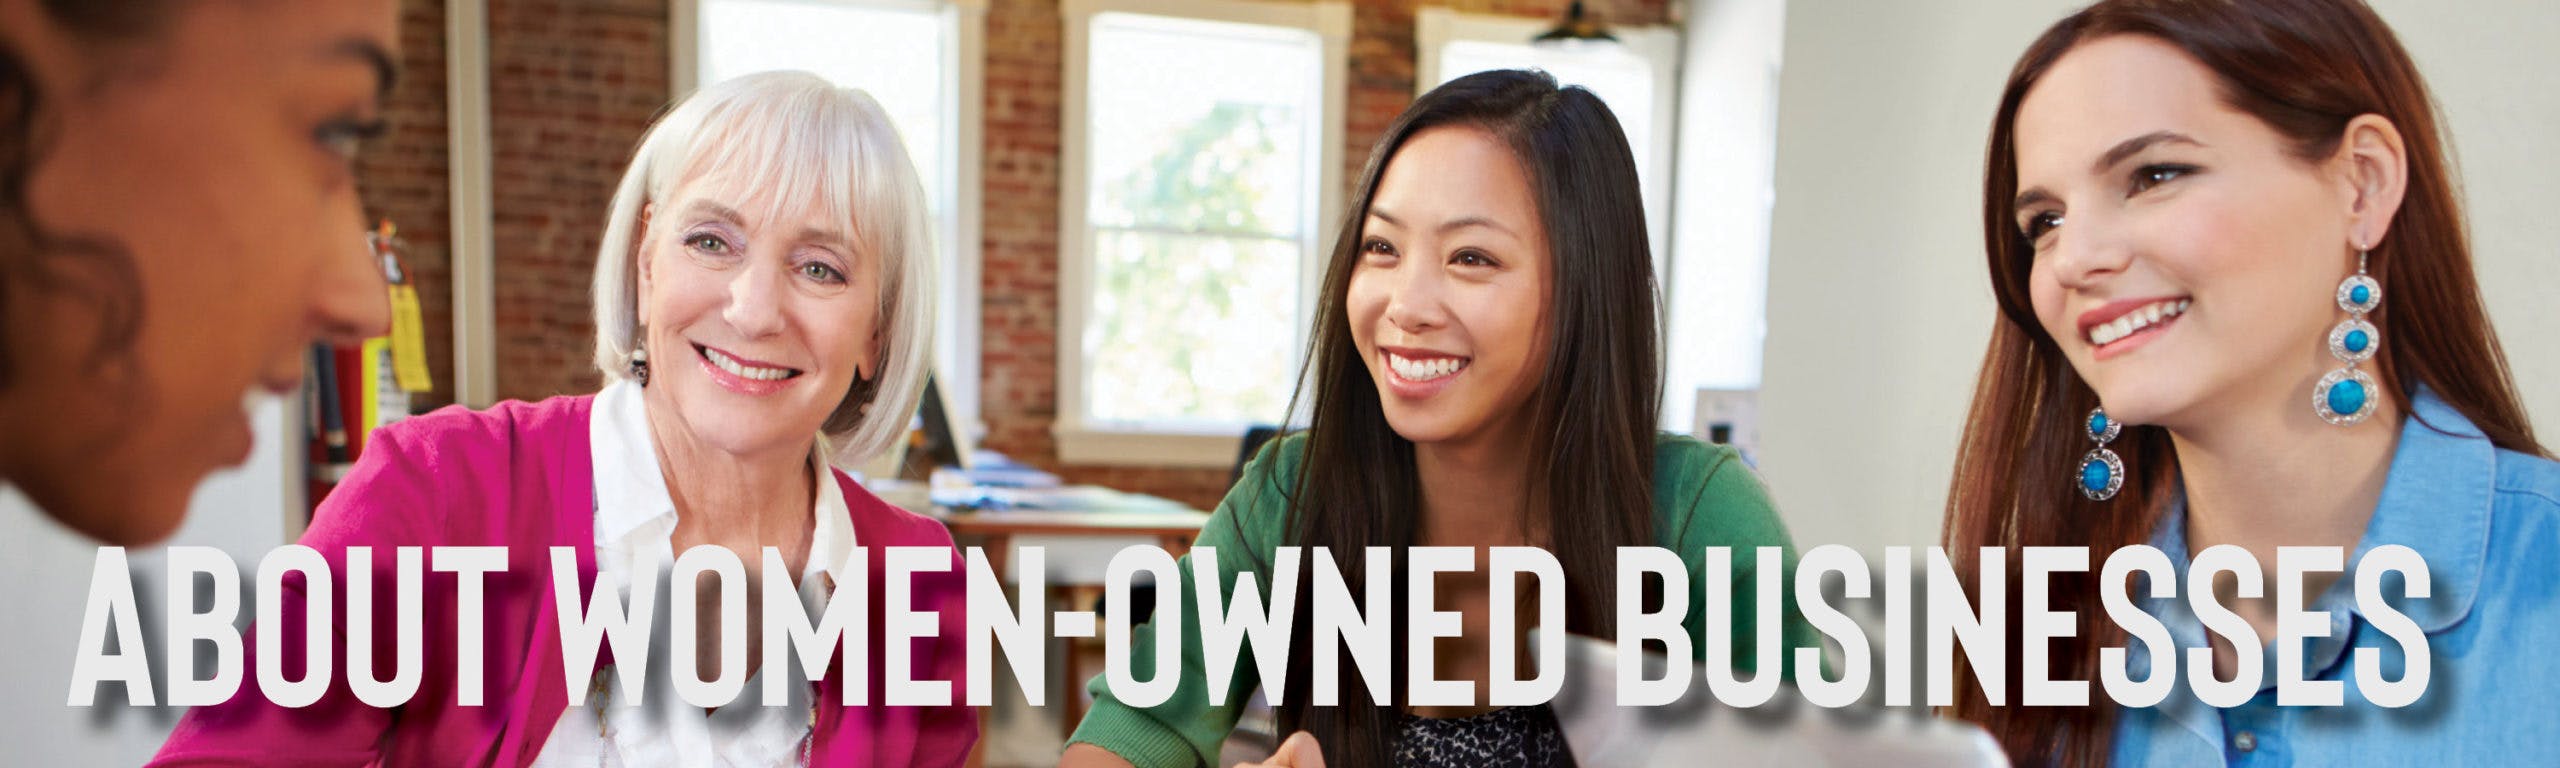 About Women-Owned Businesses